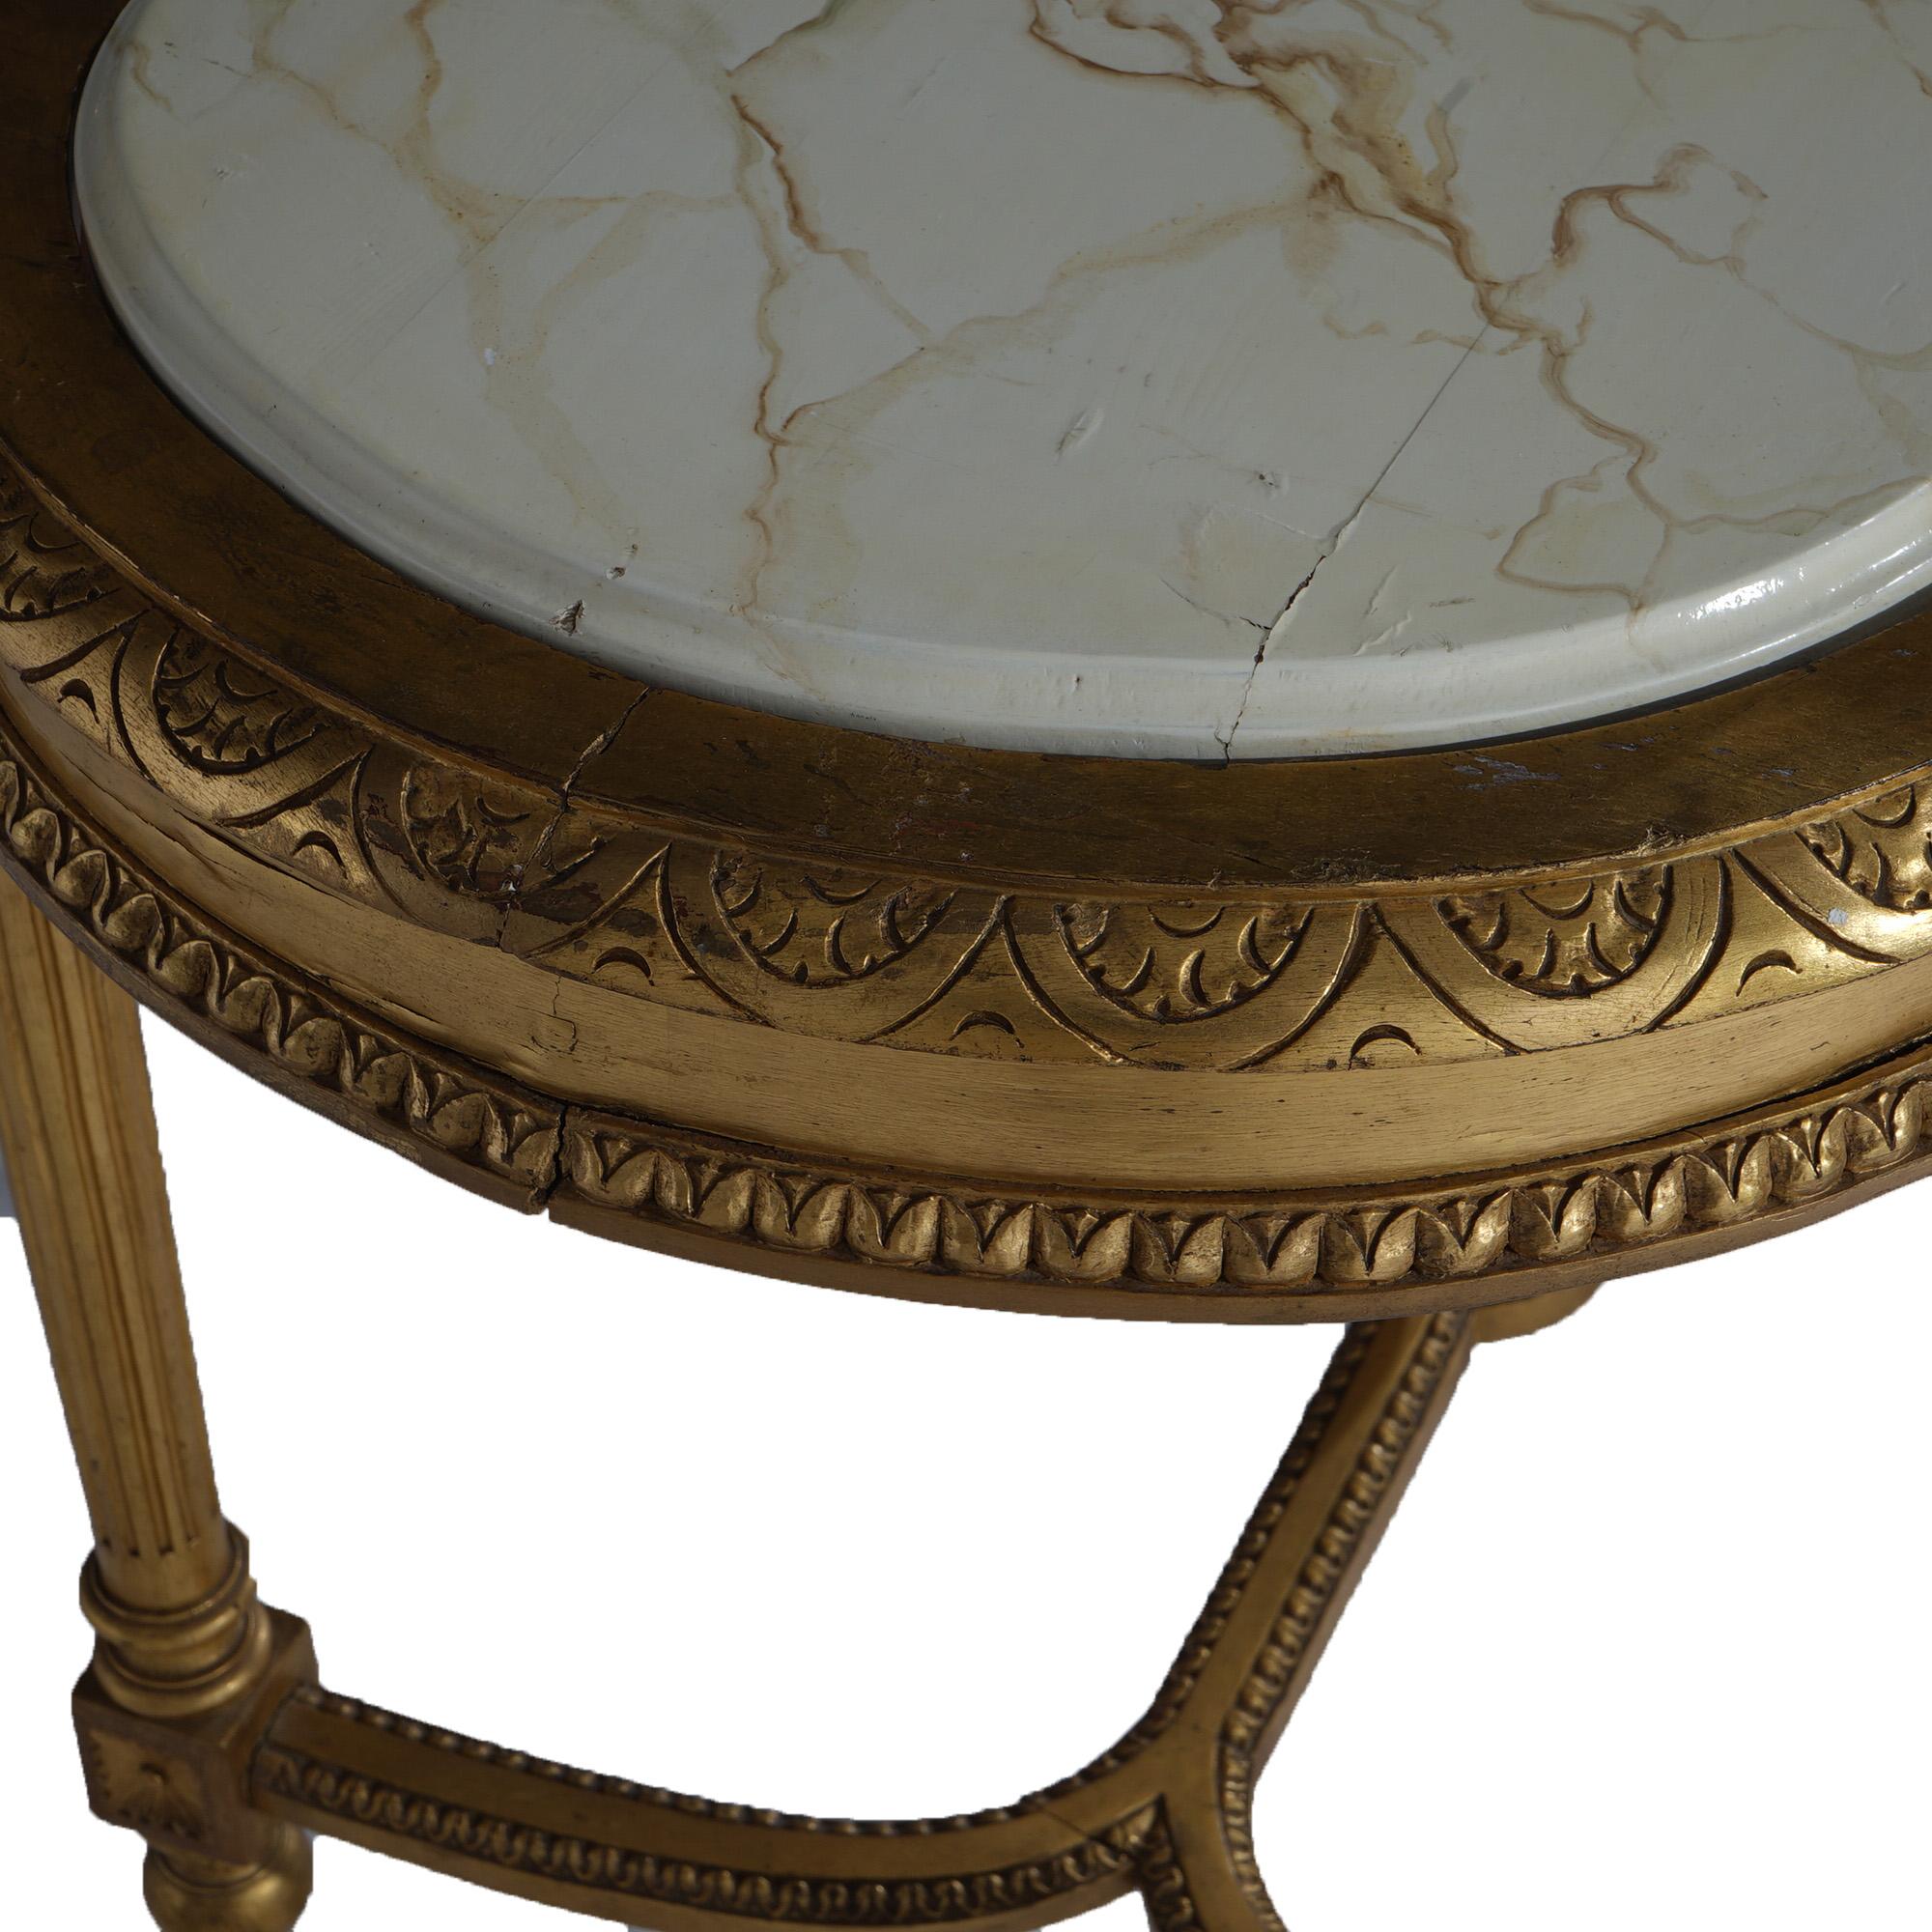 Antique French Louis XVI Style Giltwood Parlor Table with Faux Painted Top 19thC 12